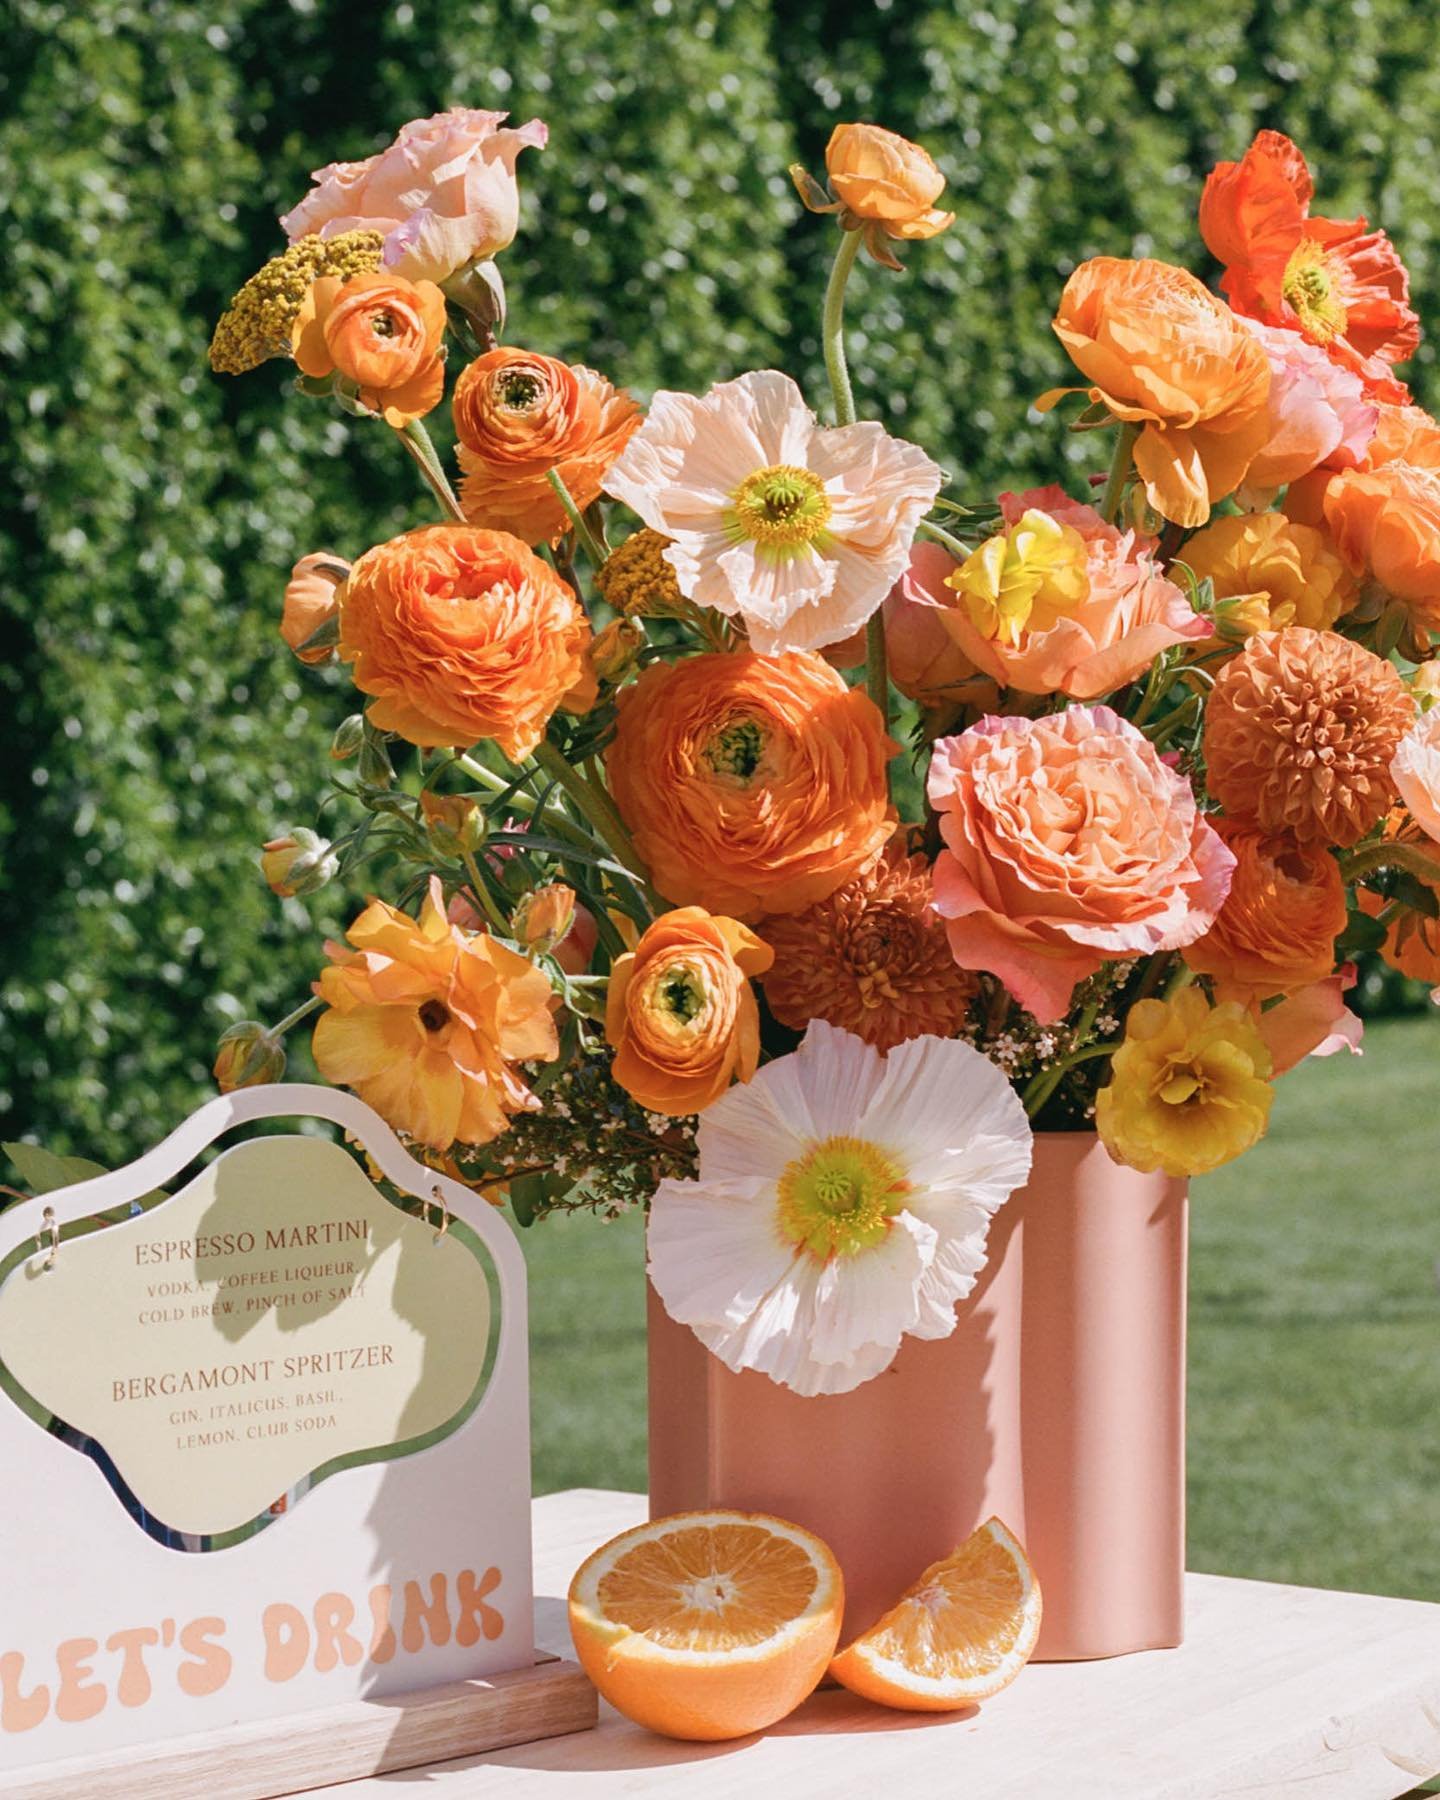 How about those poppies though?!! 🍊
.
Photographer: @sincerelysini 
Planner: @detailsdarling @kaylakam
Signage: @wildhouseink 
Venue: @villaroyale_palmsprings